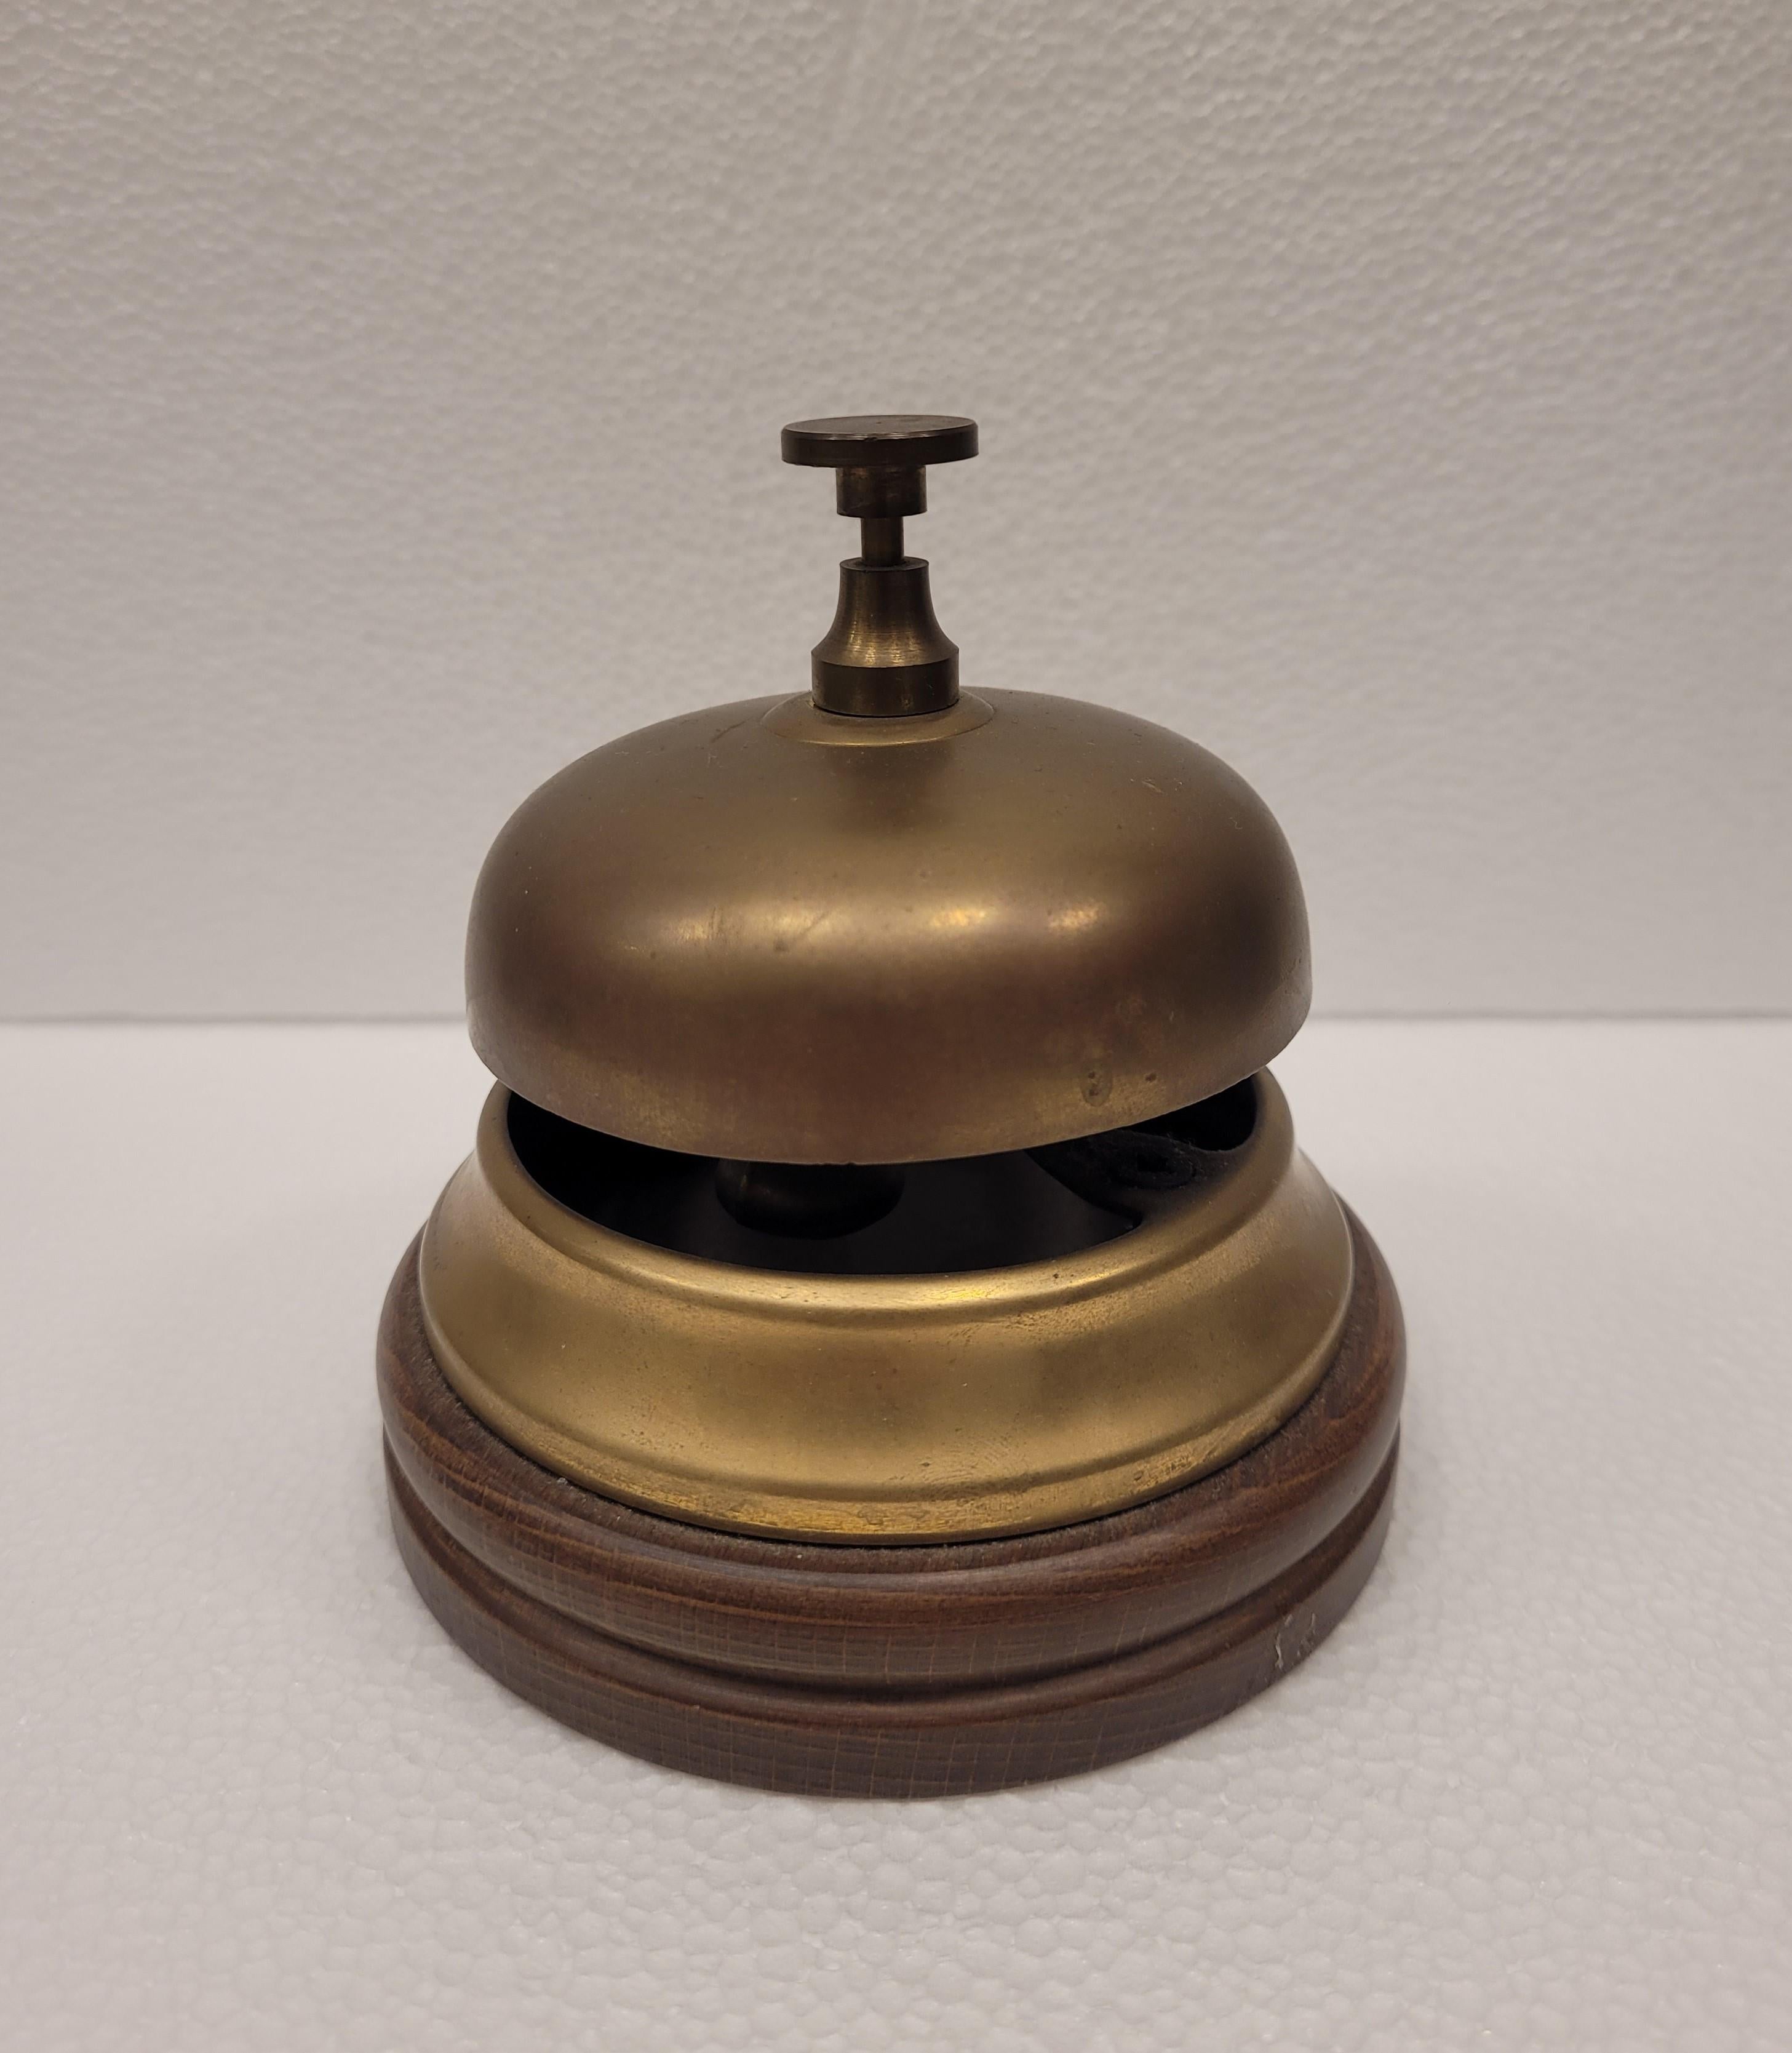 A very good idea for an original present!!!!! A Classic reception style bronze bell with oak base. Bronze with golden lustre and polished oak wood.

It is a delicate piece that fuses precision with a refined aesthetic sense. The elegant design